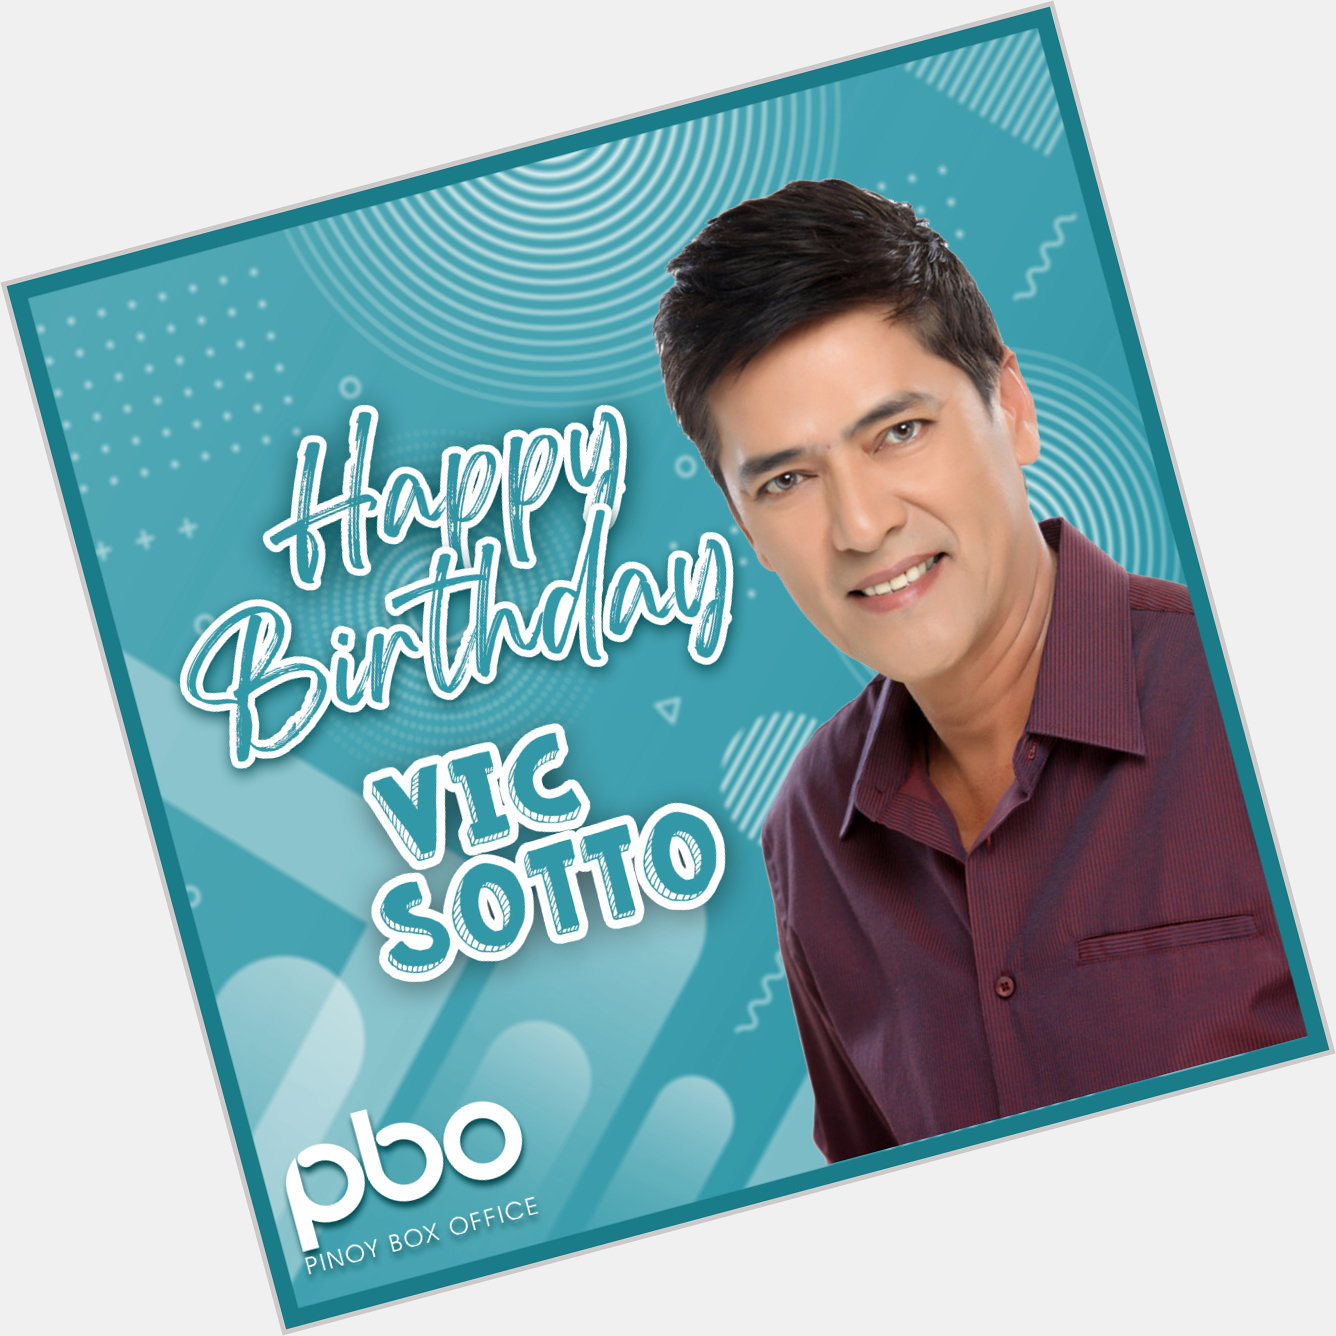 Happy birthday, Bossing Vic Sotto! May your special day be amazing and wonderful just like you! 